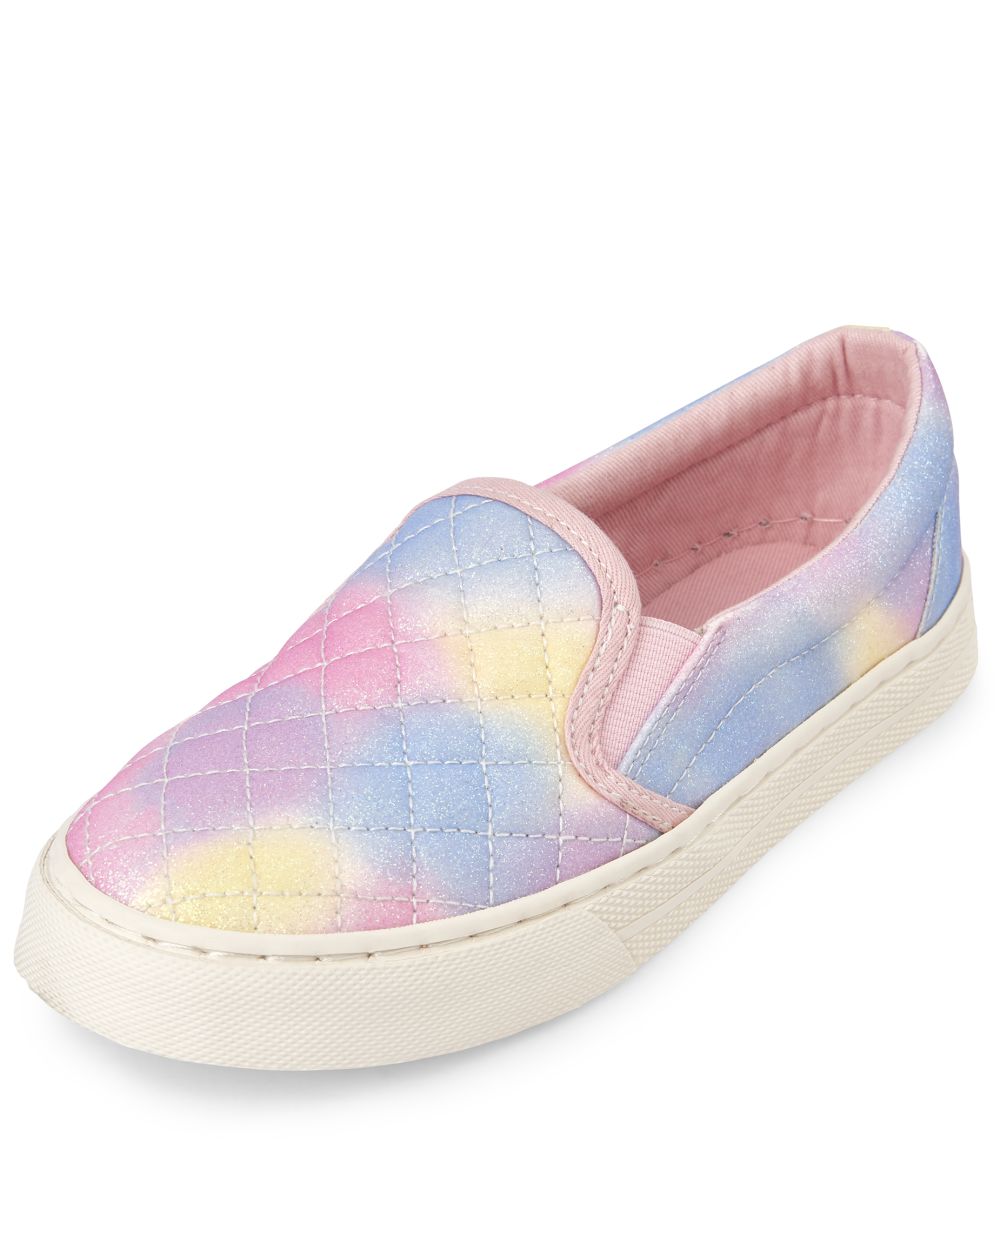 Girls Glitter Quilted Tie Dye Faux Leather Slip On Sneakers